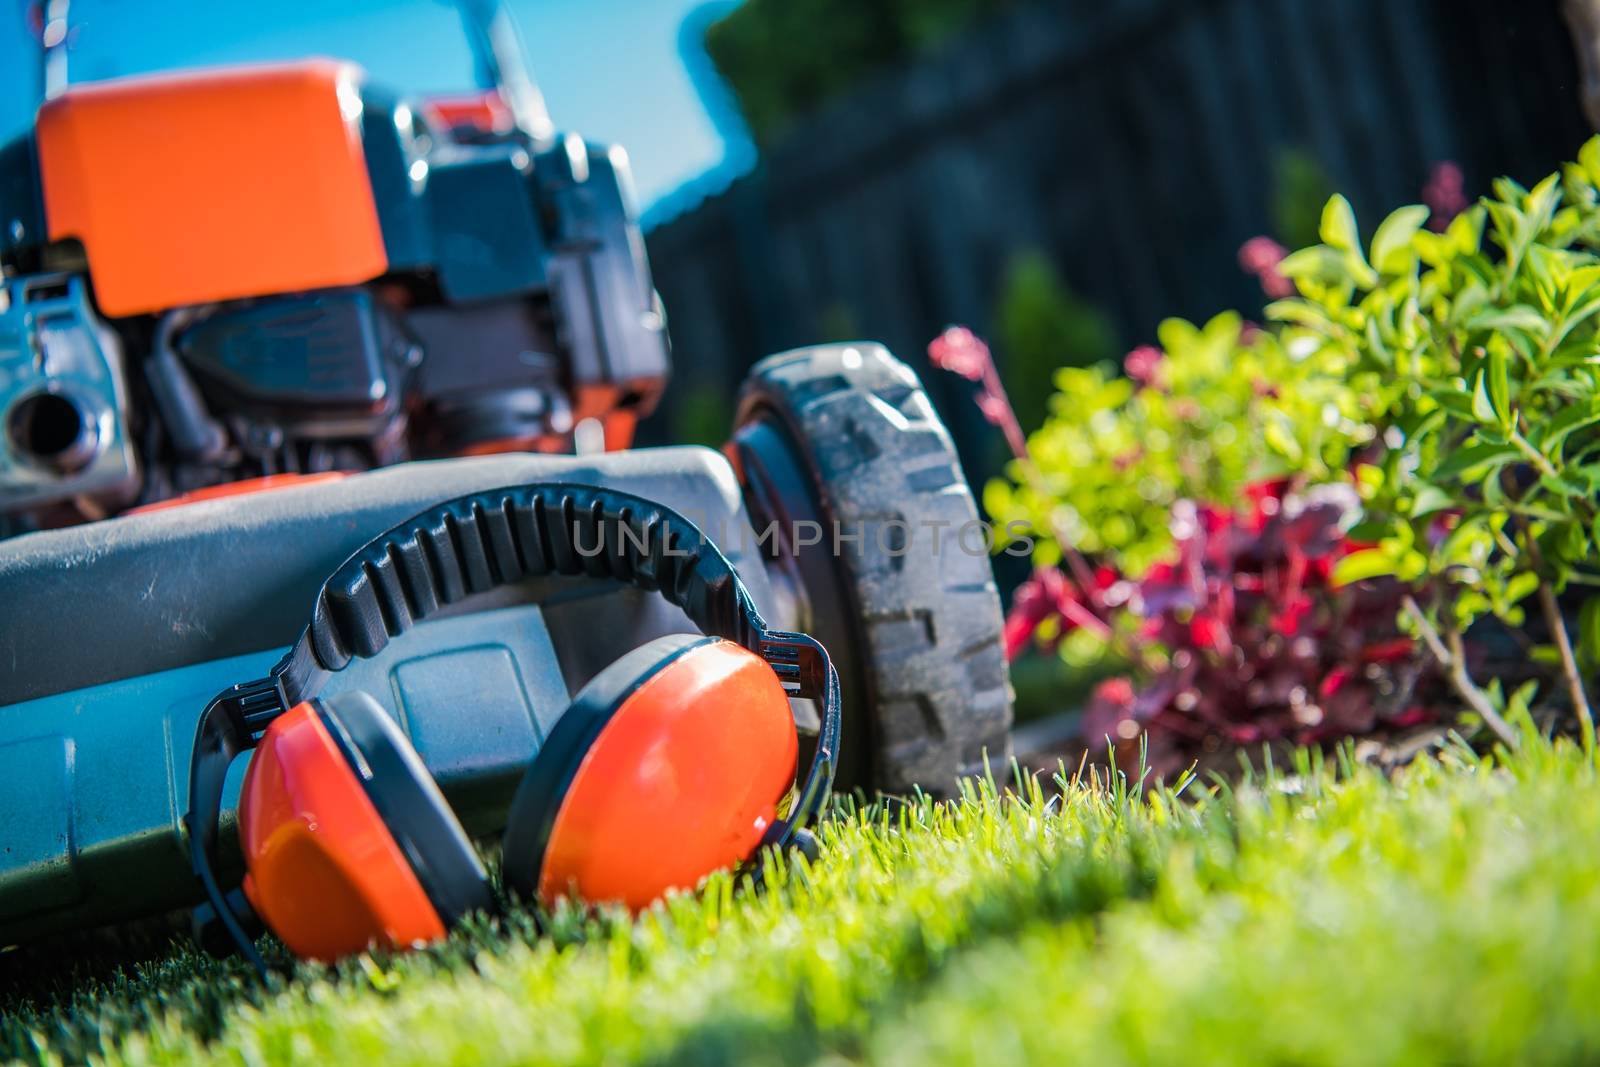 Hearing Protection While Working with Power Tools in the Garden. Ear Protectors and the Lawn Mower Closeup Photo.